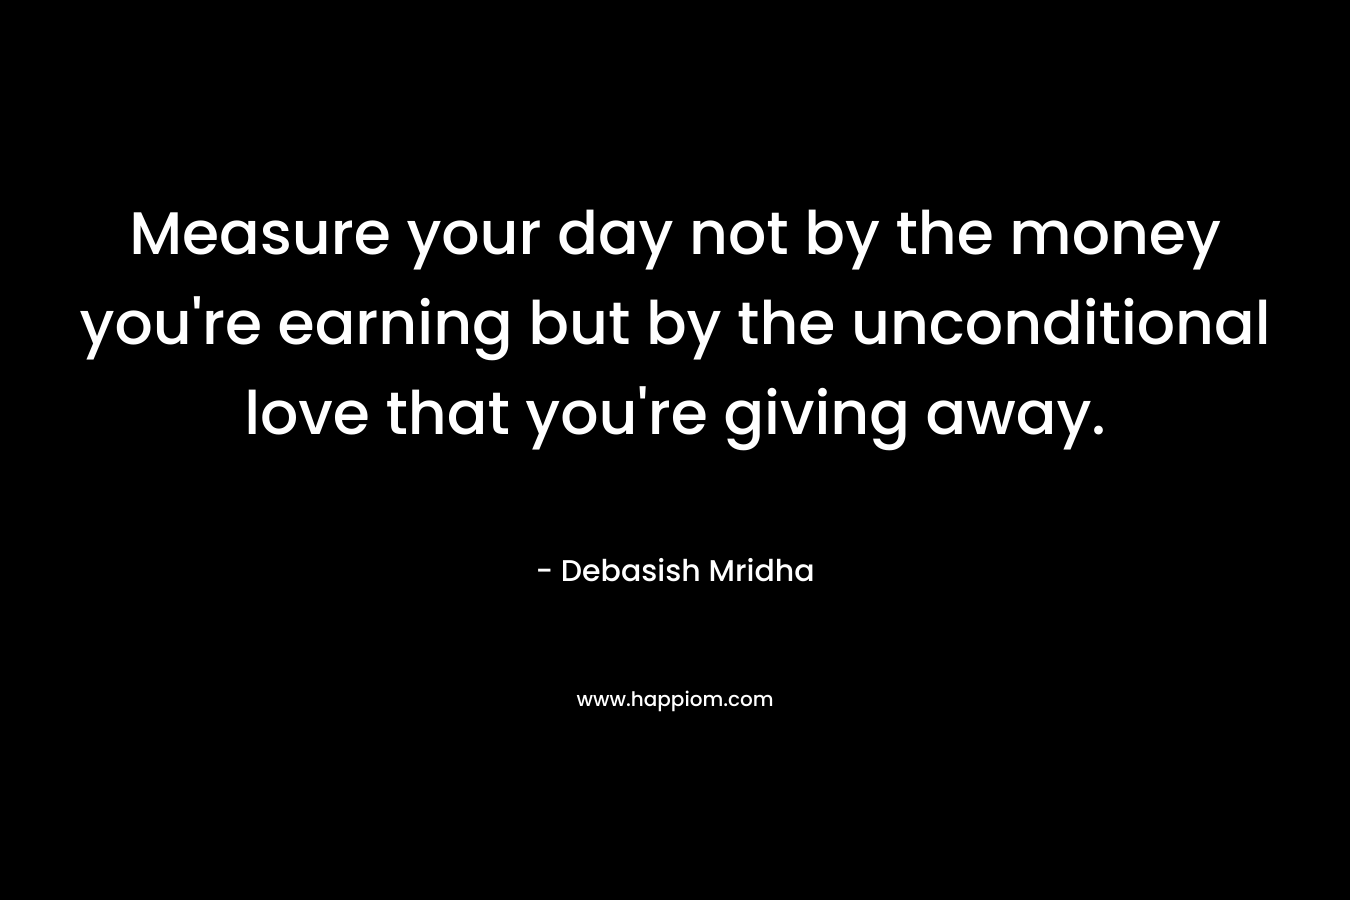 Measure your day not by the money you're earning but by the unconditional love that you're giving away.